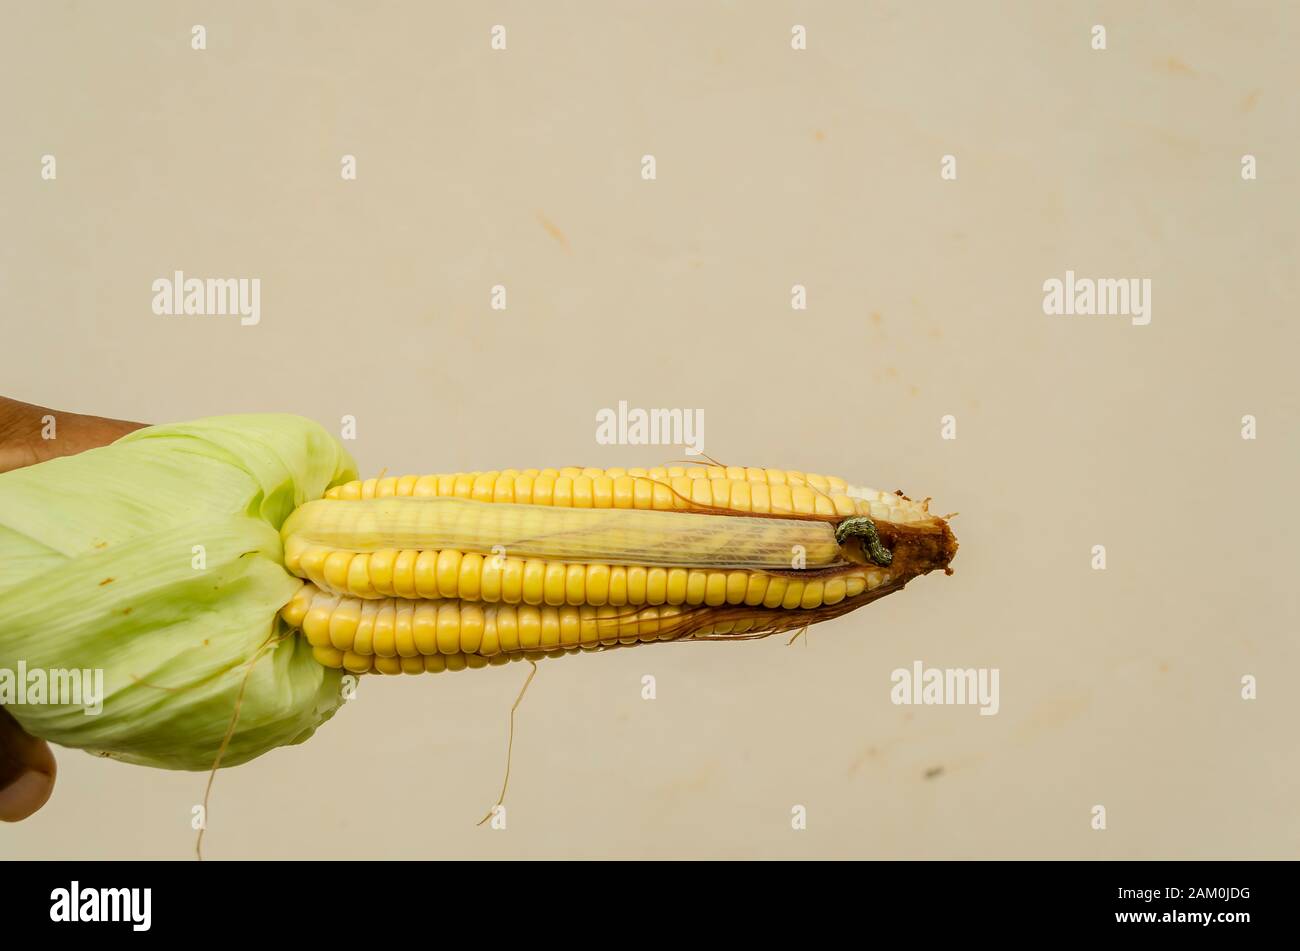 Maize With worm Stock Photo